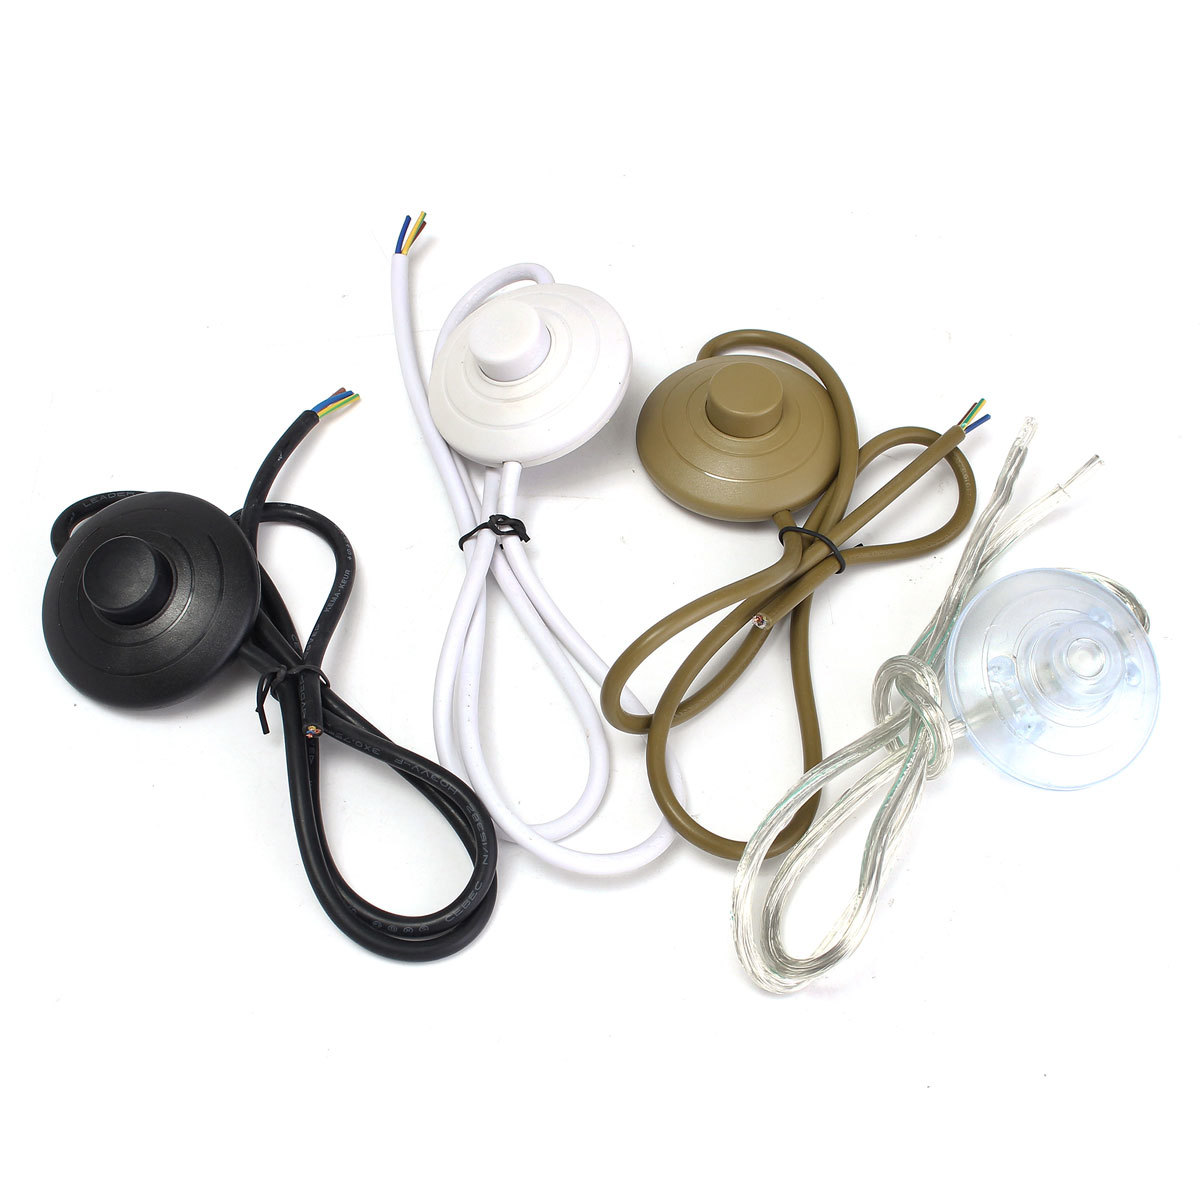 1M Circular Lighting Button Switch with 3 Core Inline Flex Cord for Table Desk Lamp 1